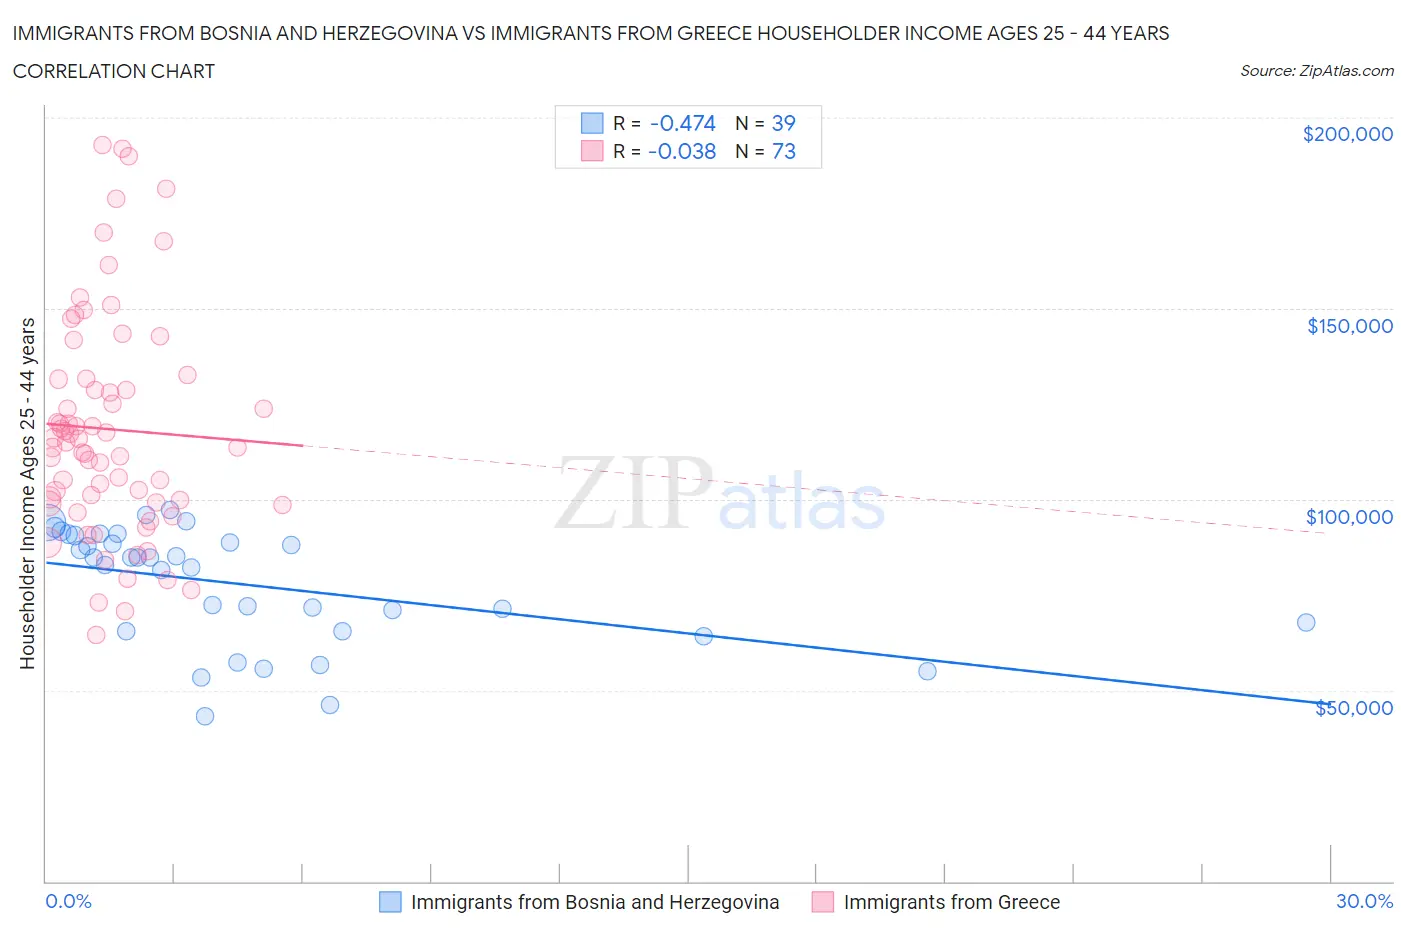 Immigrants from Bosnia and Herzegovina vs Immigrants from Greece Householder Income Ages 25 - 44 years